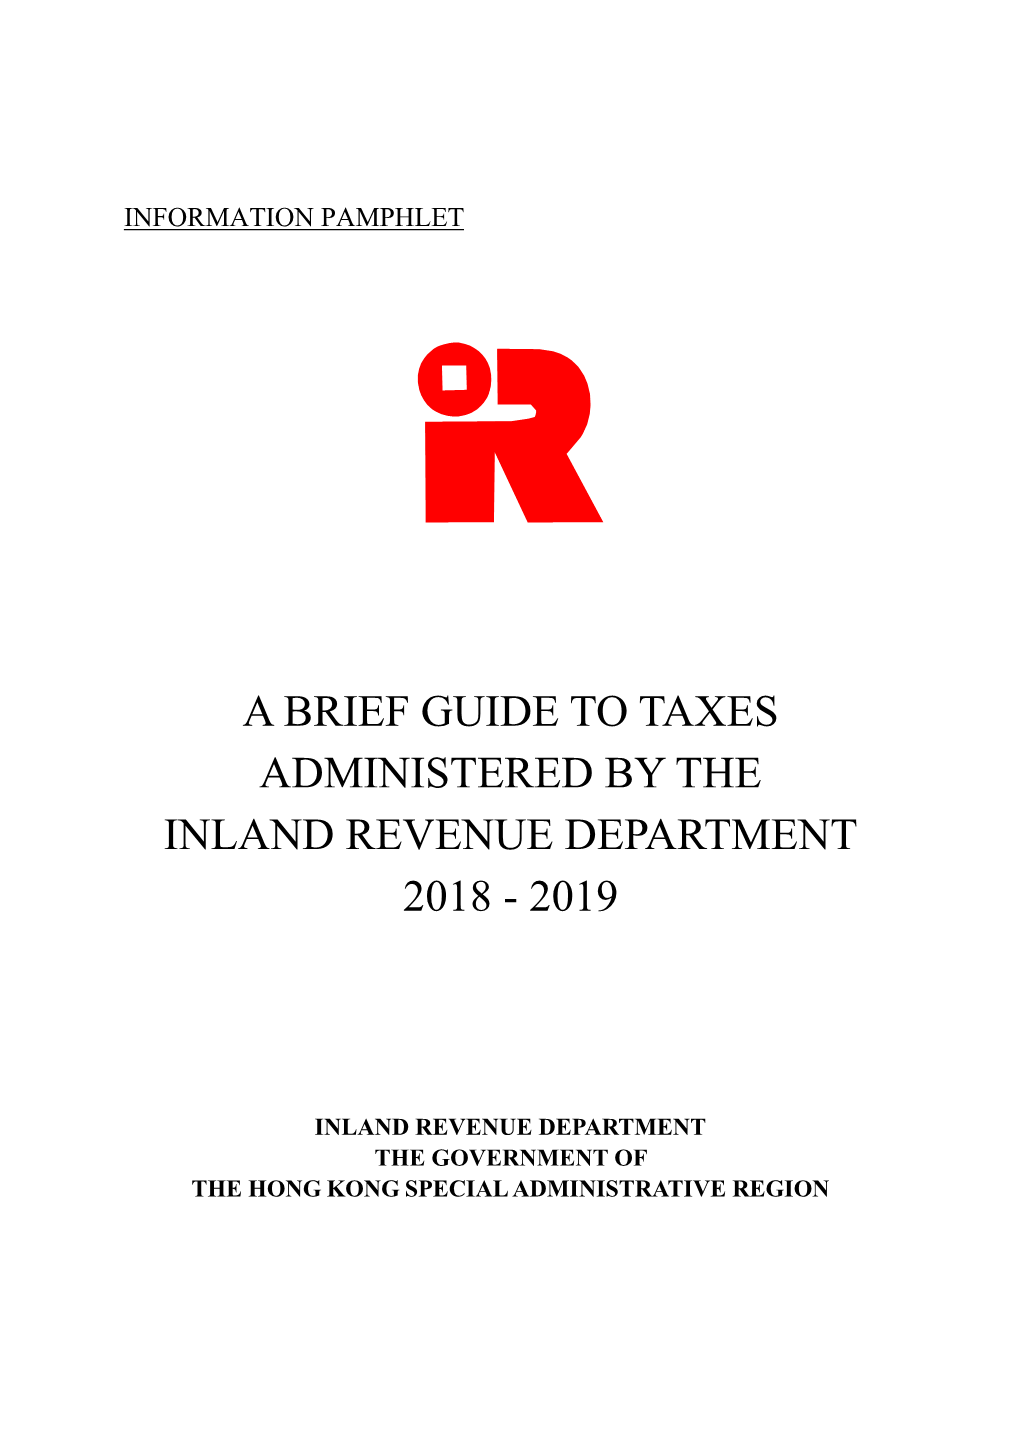 A Brief Guide to Taxes Administered by the Inland Revenue Department